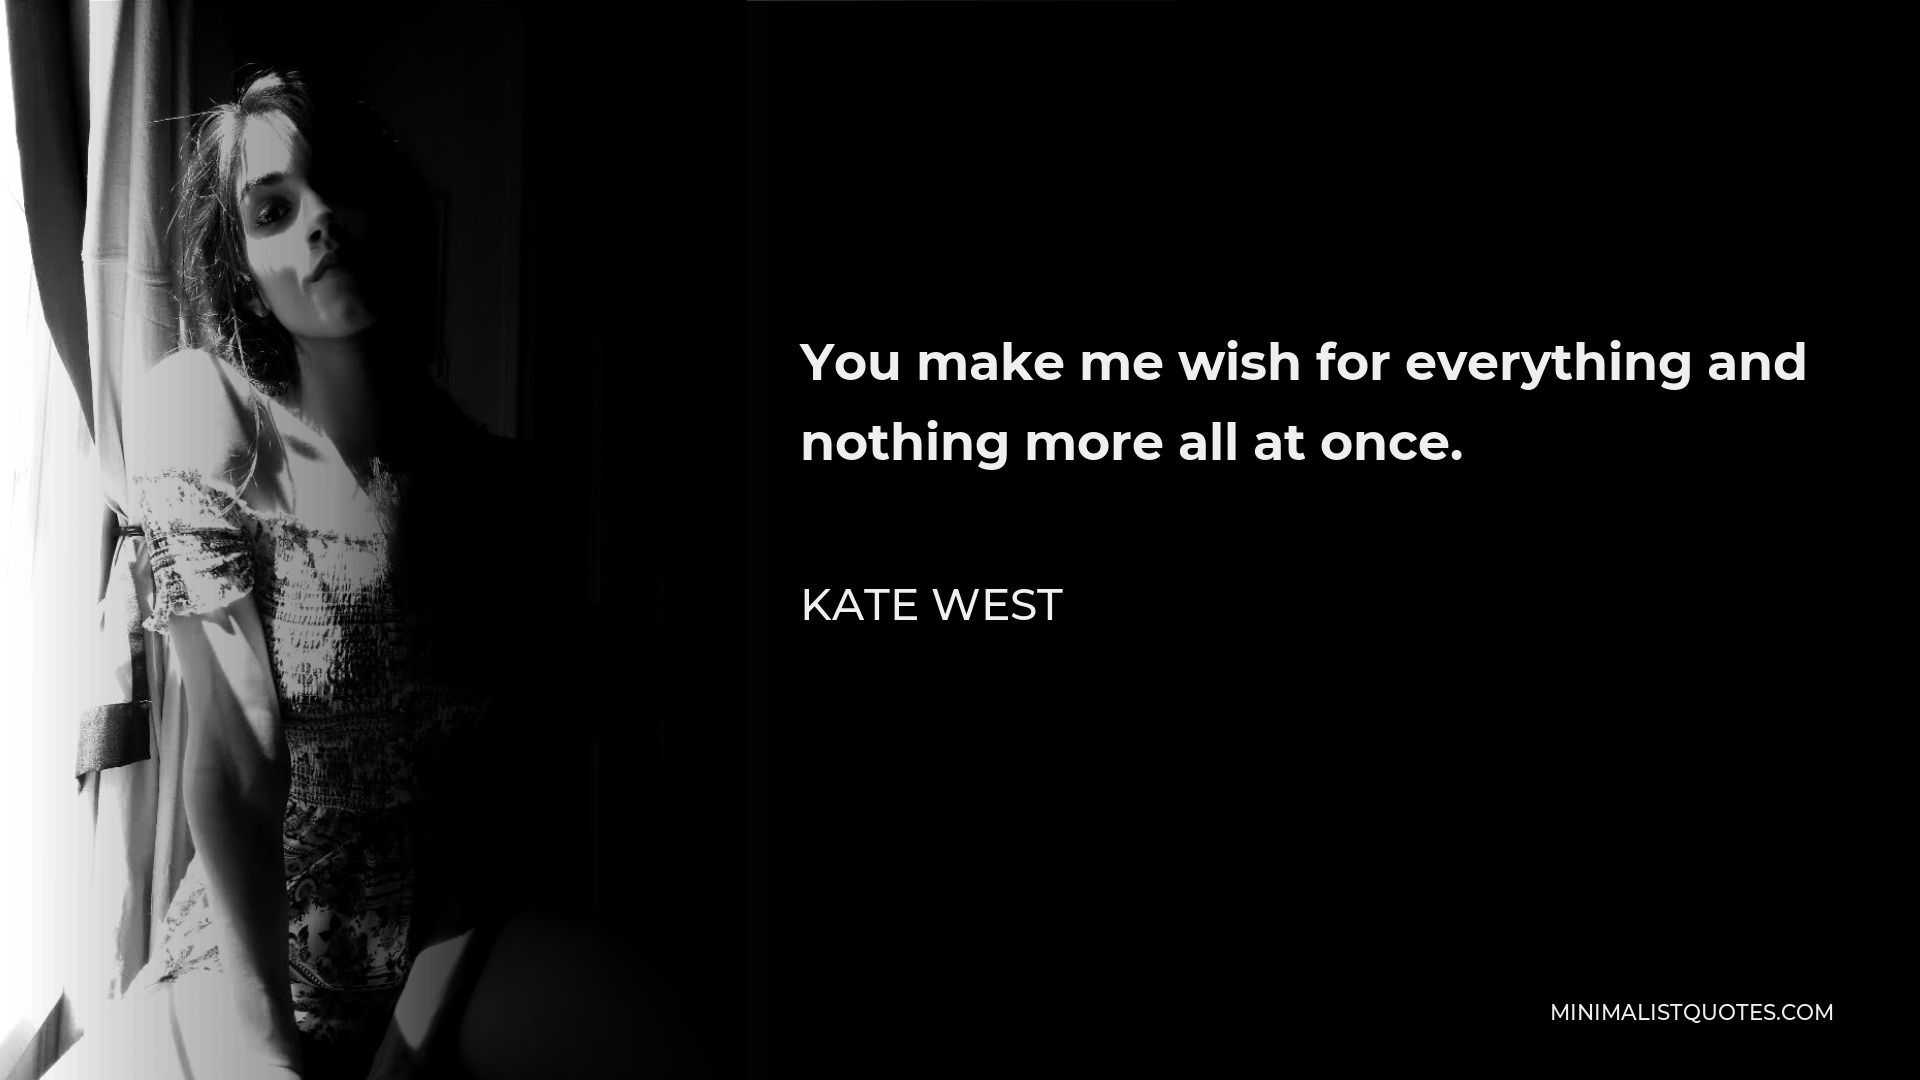 Kate West Quote - You make me wish for everything and nothing more all at once.